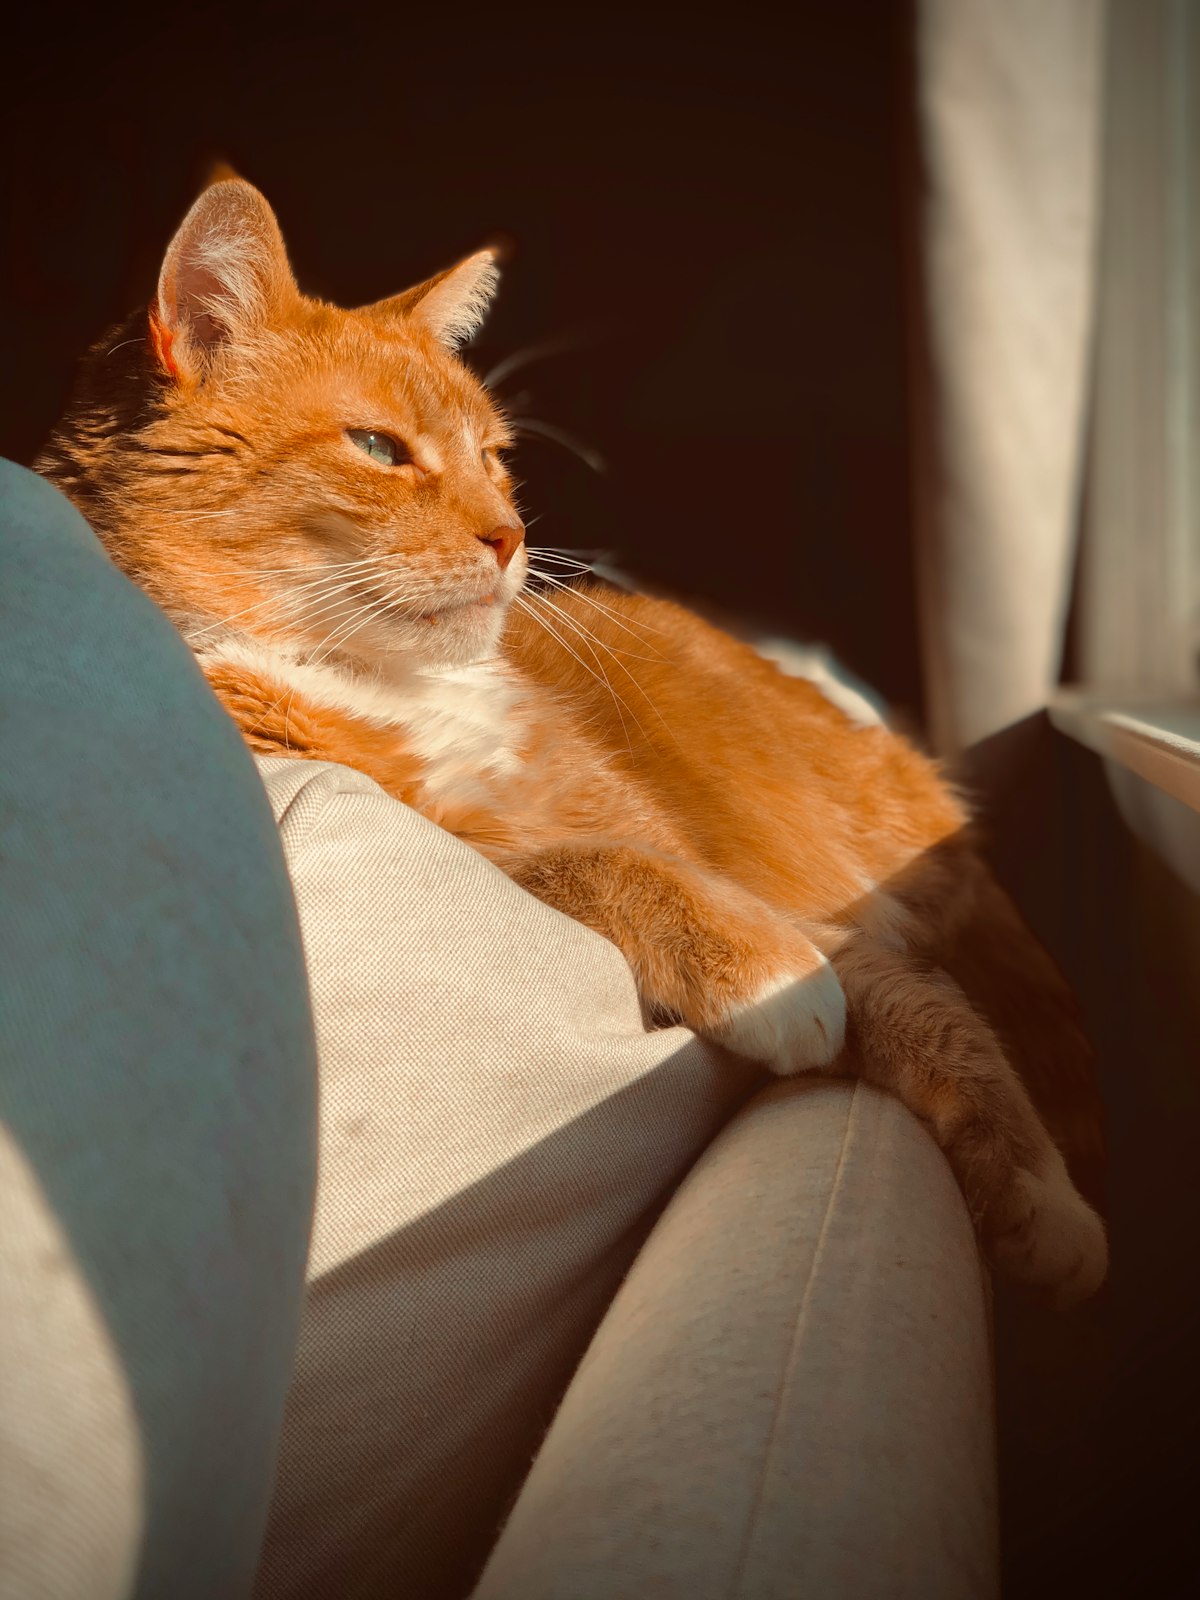 A ginger cat sitting on a chair in the sun looking out the window